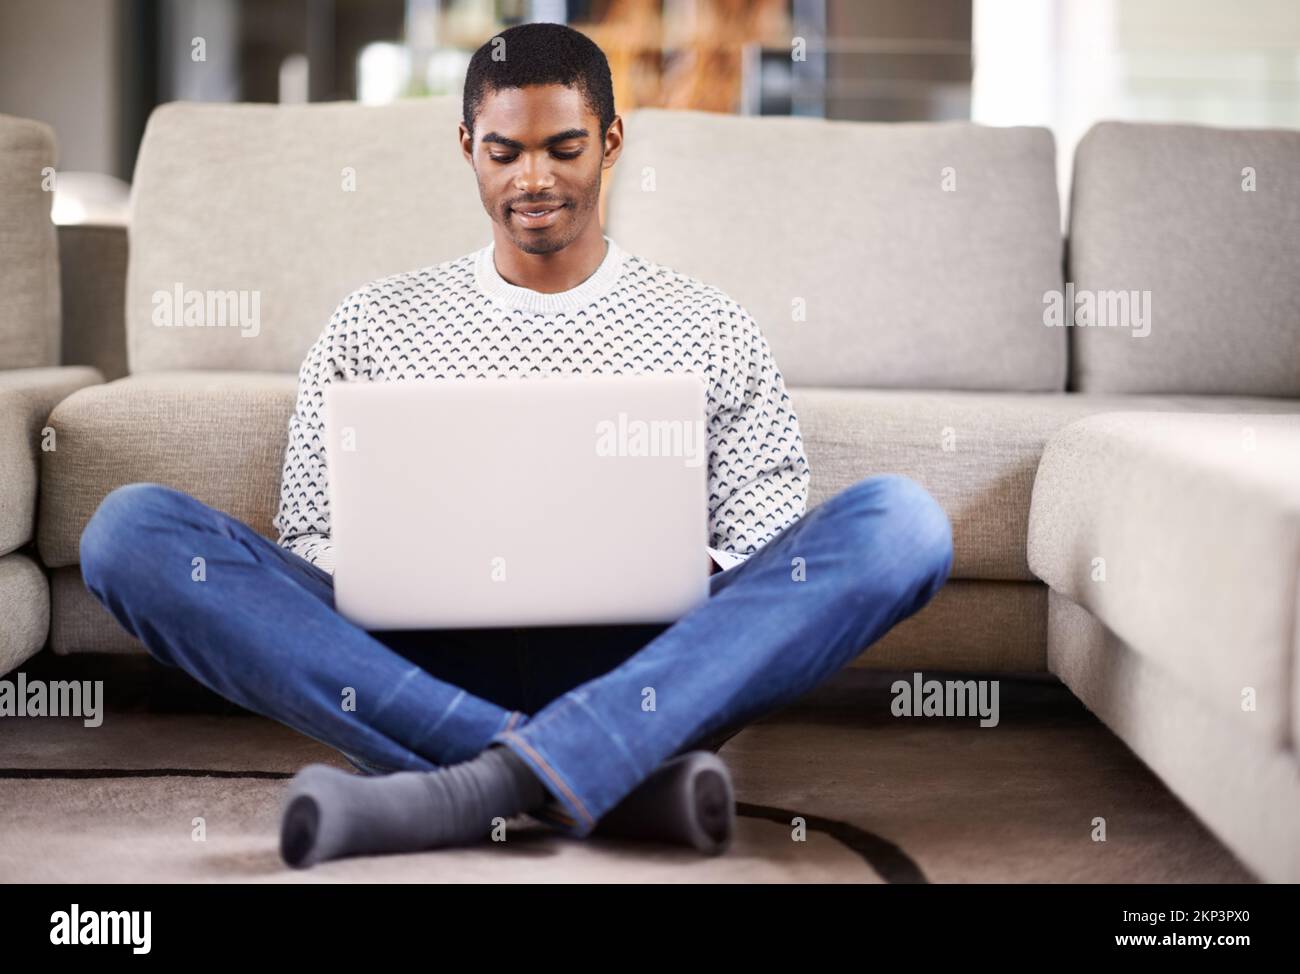 Reaching out to the world. a handsome young man using his laptop while relaxing at home. Stock Photo